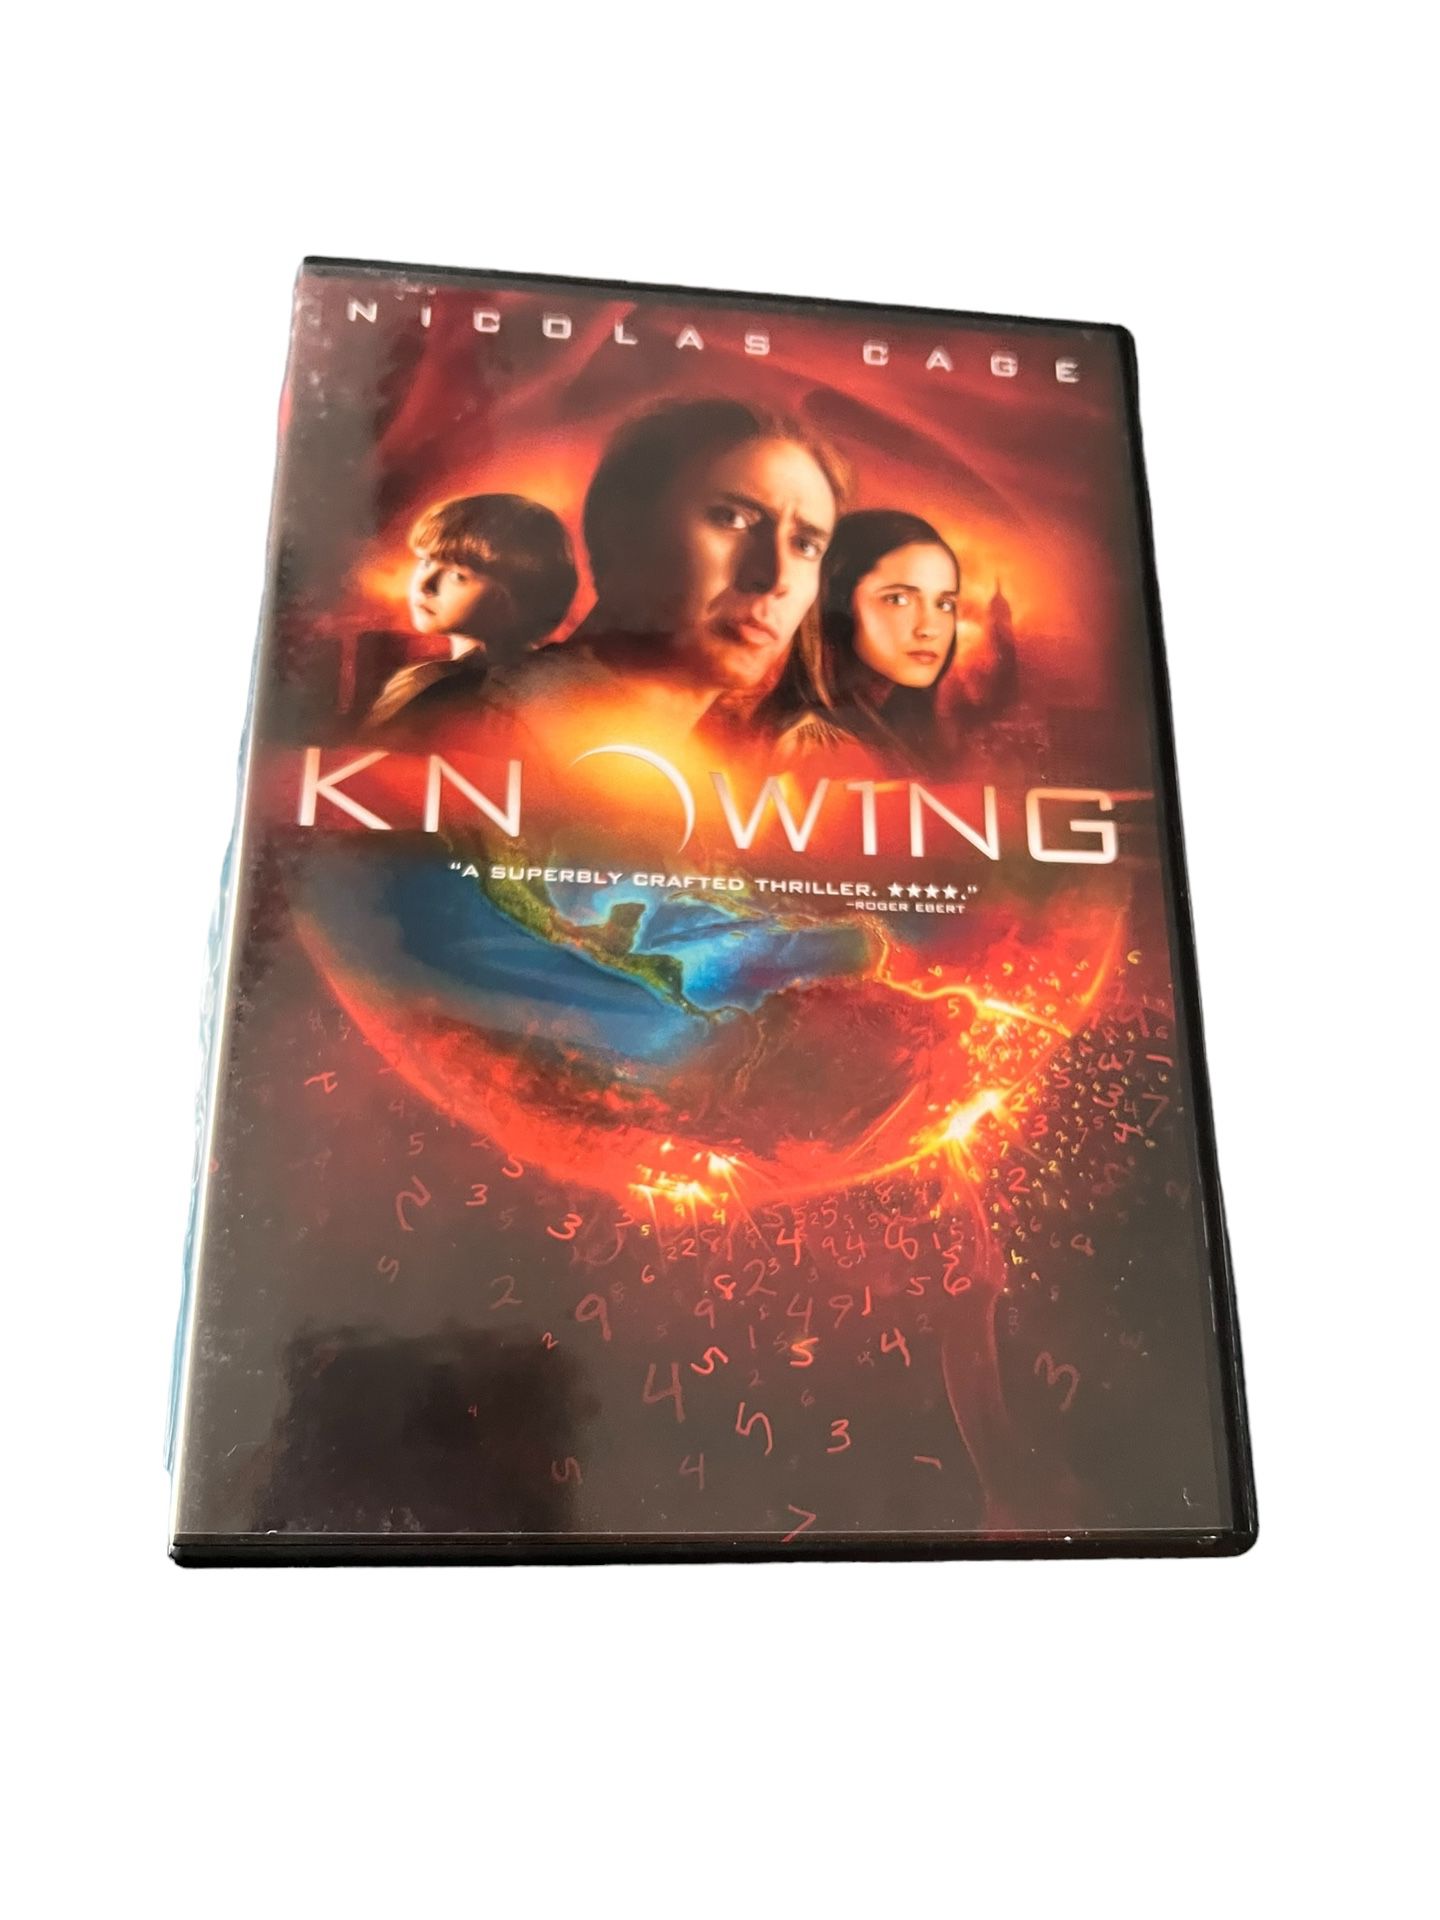 Knowing (DVD, 2009) Nicolas Cage DVD  This DVD features Nicolas Cage in the 2009 science fiction film, "Knowing". The DVD is compatible with players t